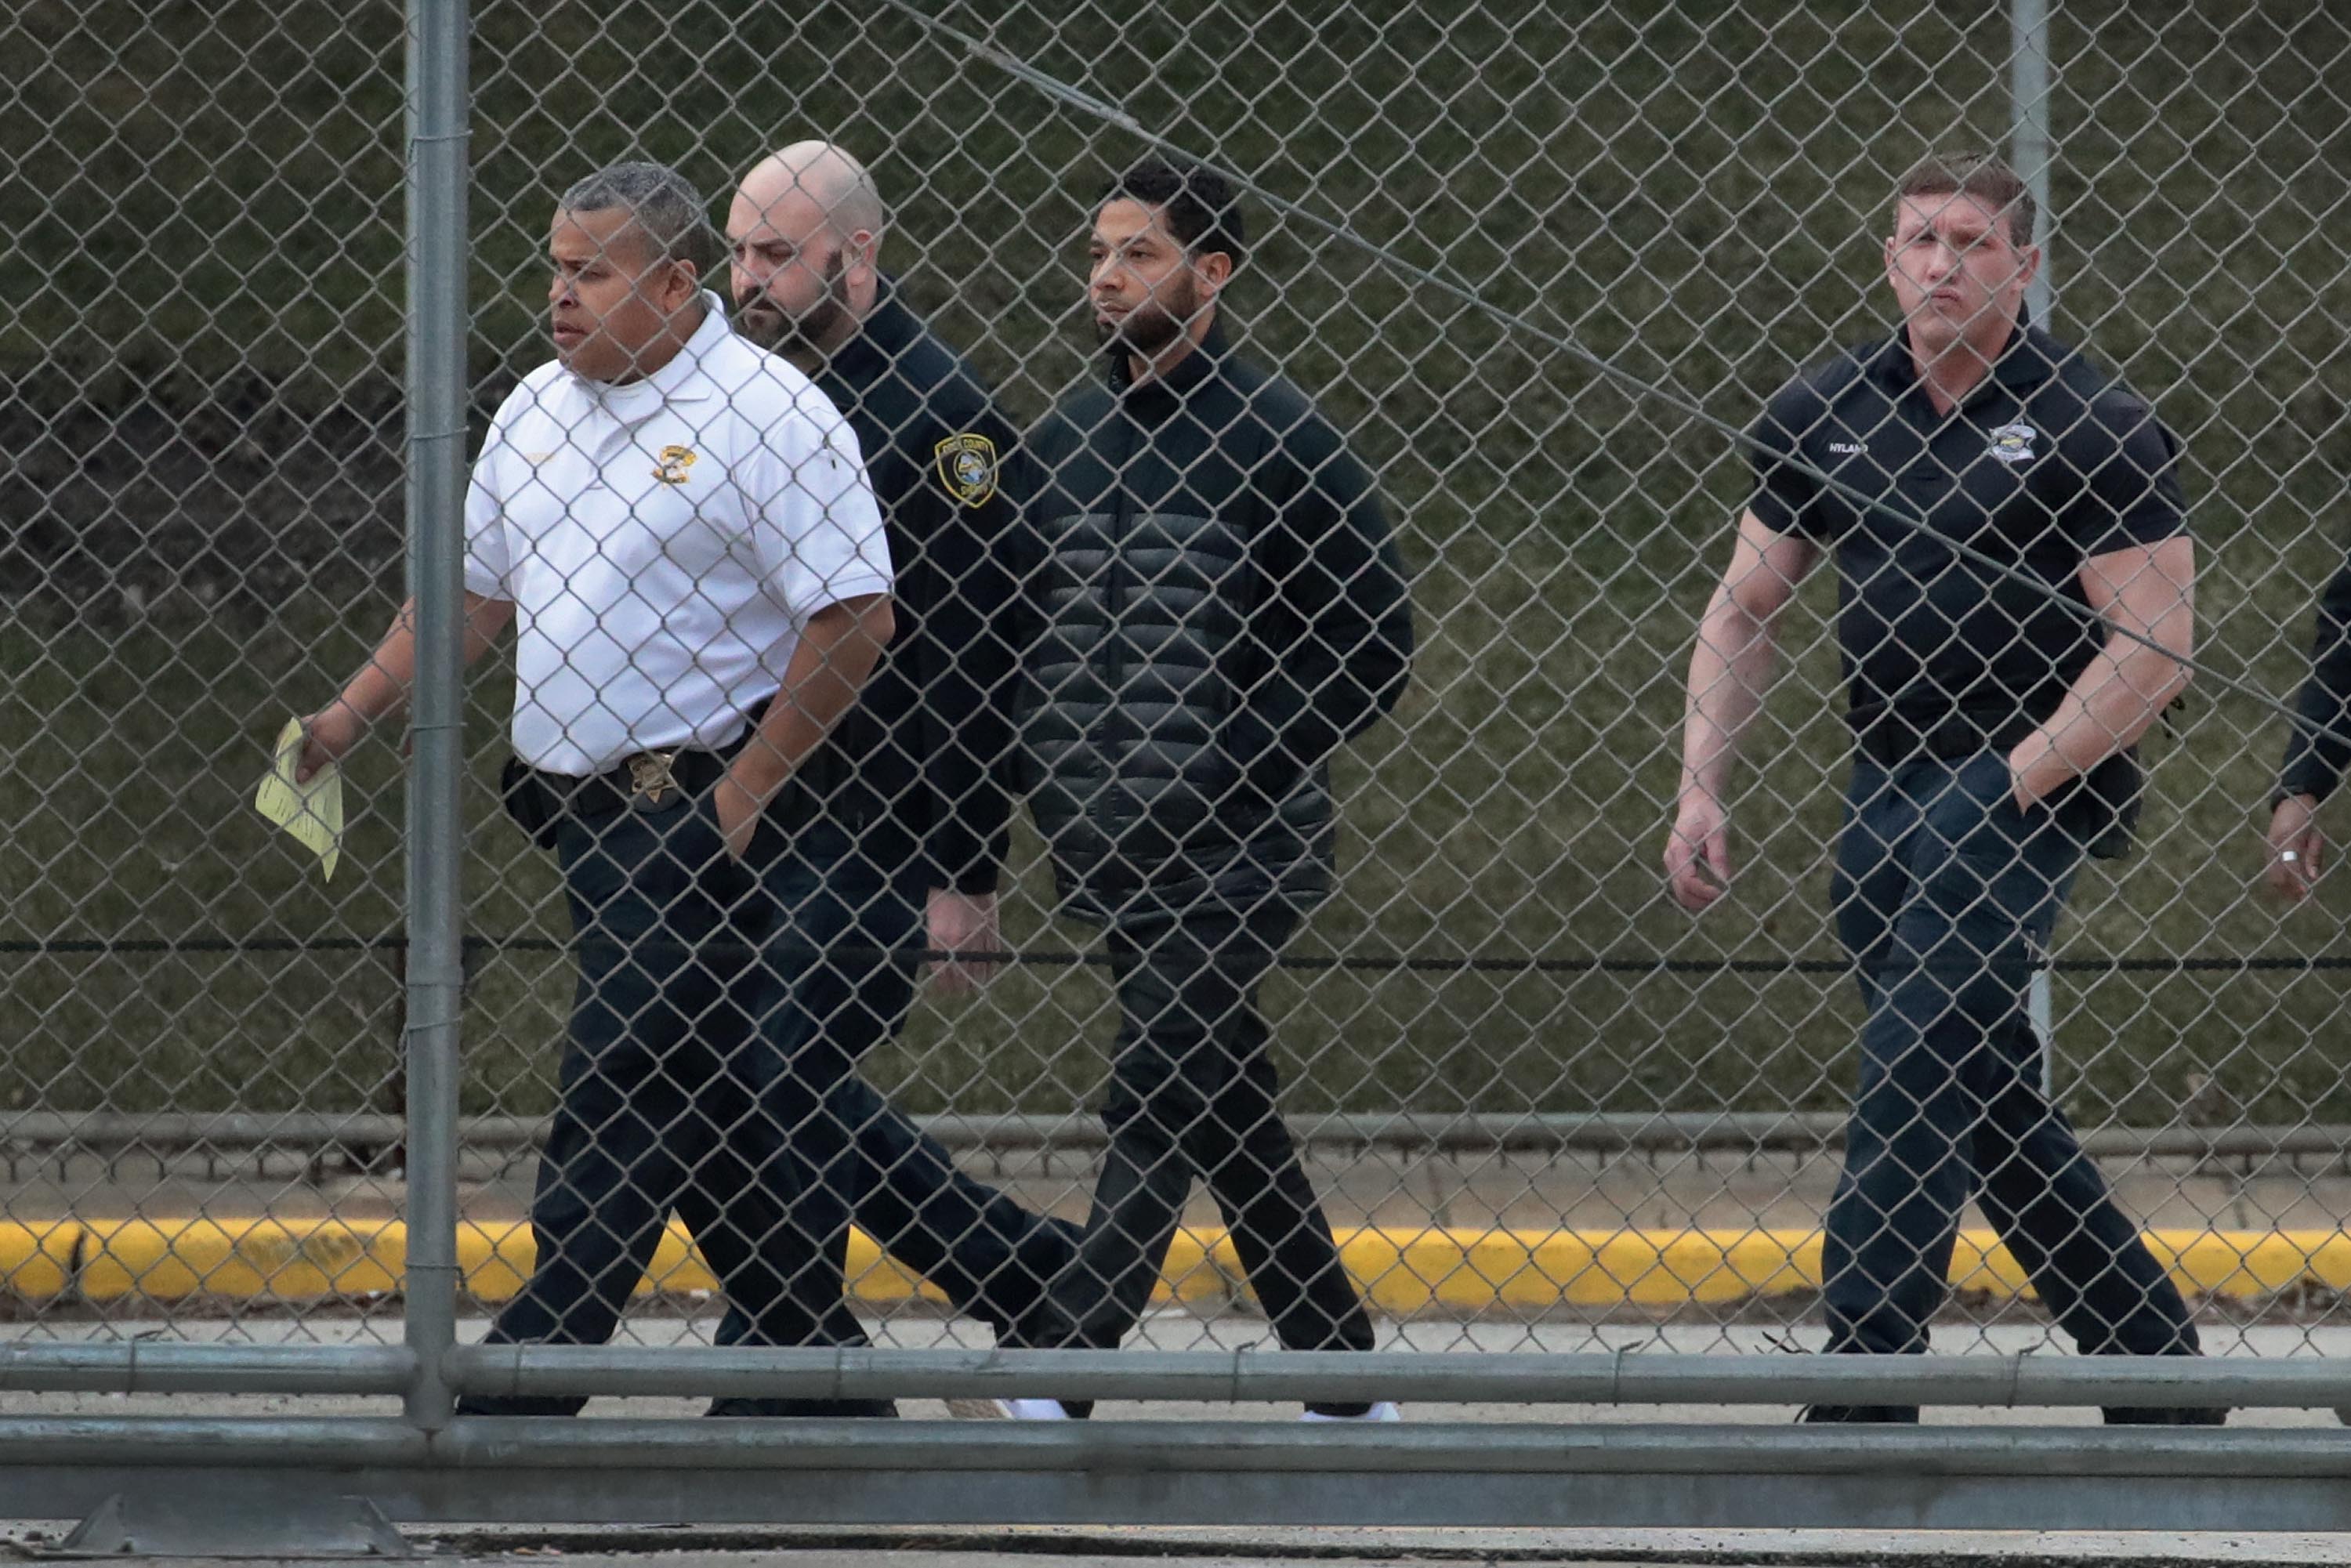 Guards walk with Empire actor Jussie Smollett before he is released on bond from Cook County jail on February 21, 2019 in Chicago, Illinois. Smollett has been accused with arranging a homophobic, racist attack against himself in an attempt to raise his profile because he was dissatisfied with his salary. (Photo by Scott Olson/Getty Images)